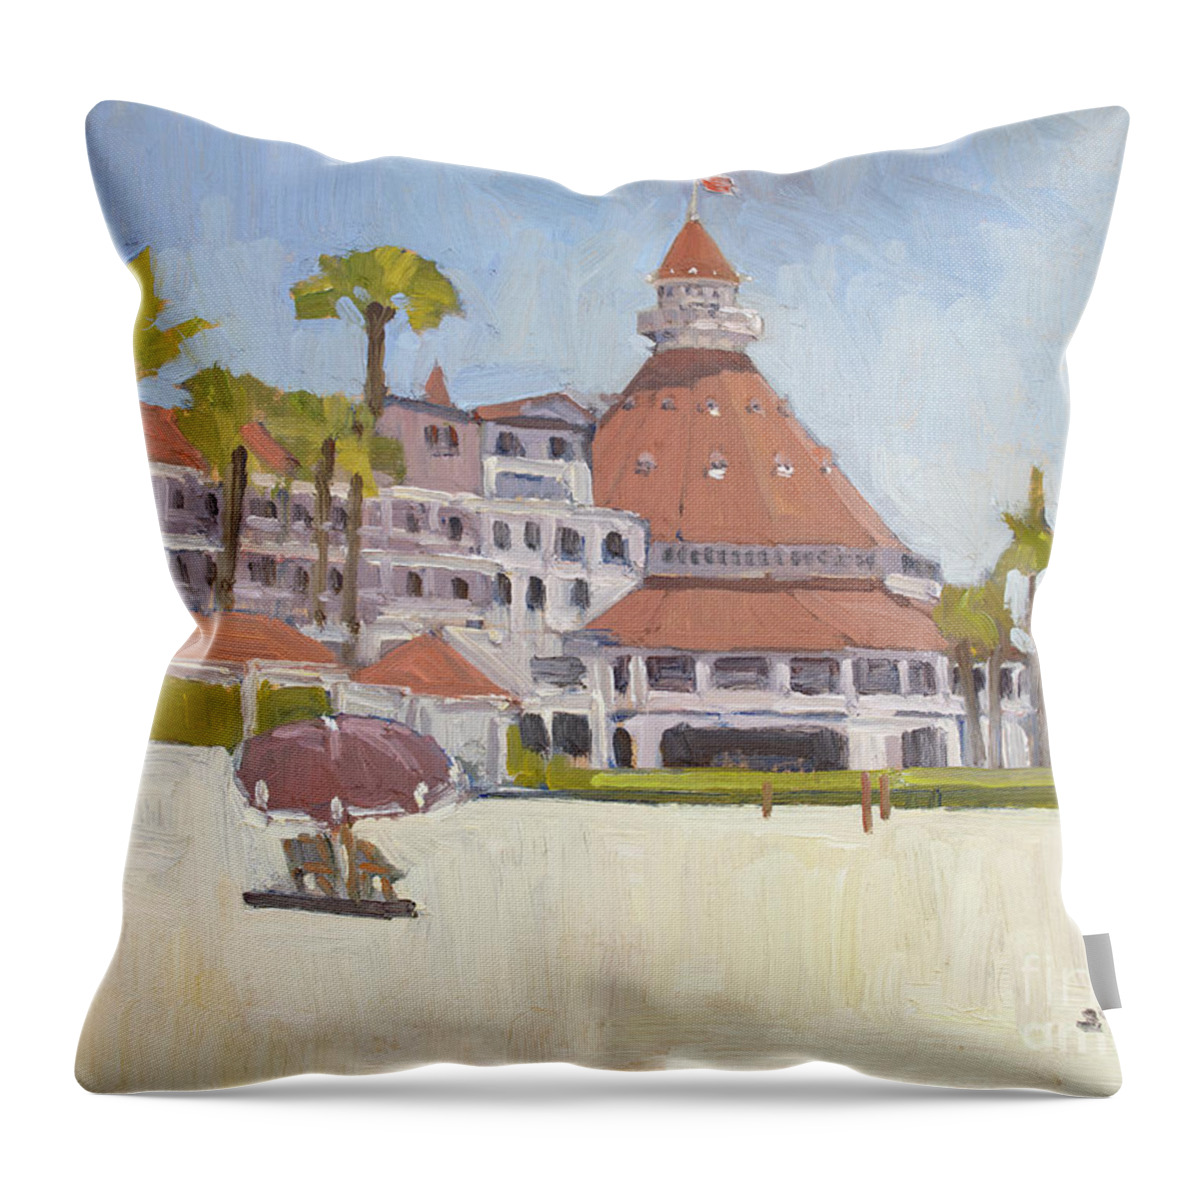 Hotel Del Coronado Throw Pillow featuring the painting Summer at Hotel Del Coronado - Coronado, San Diego, California by Paul Strahm